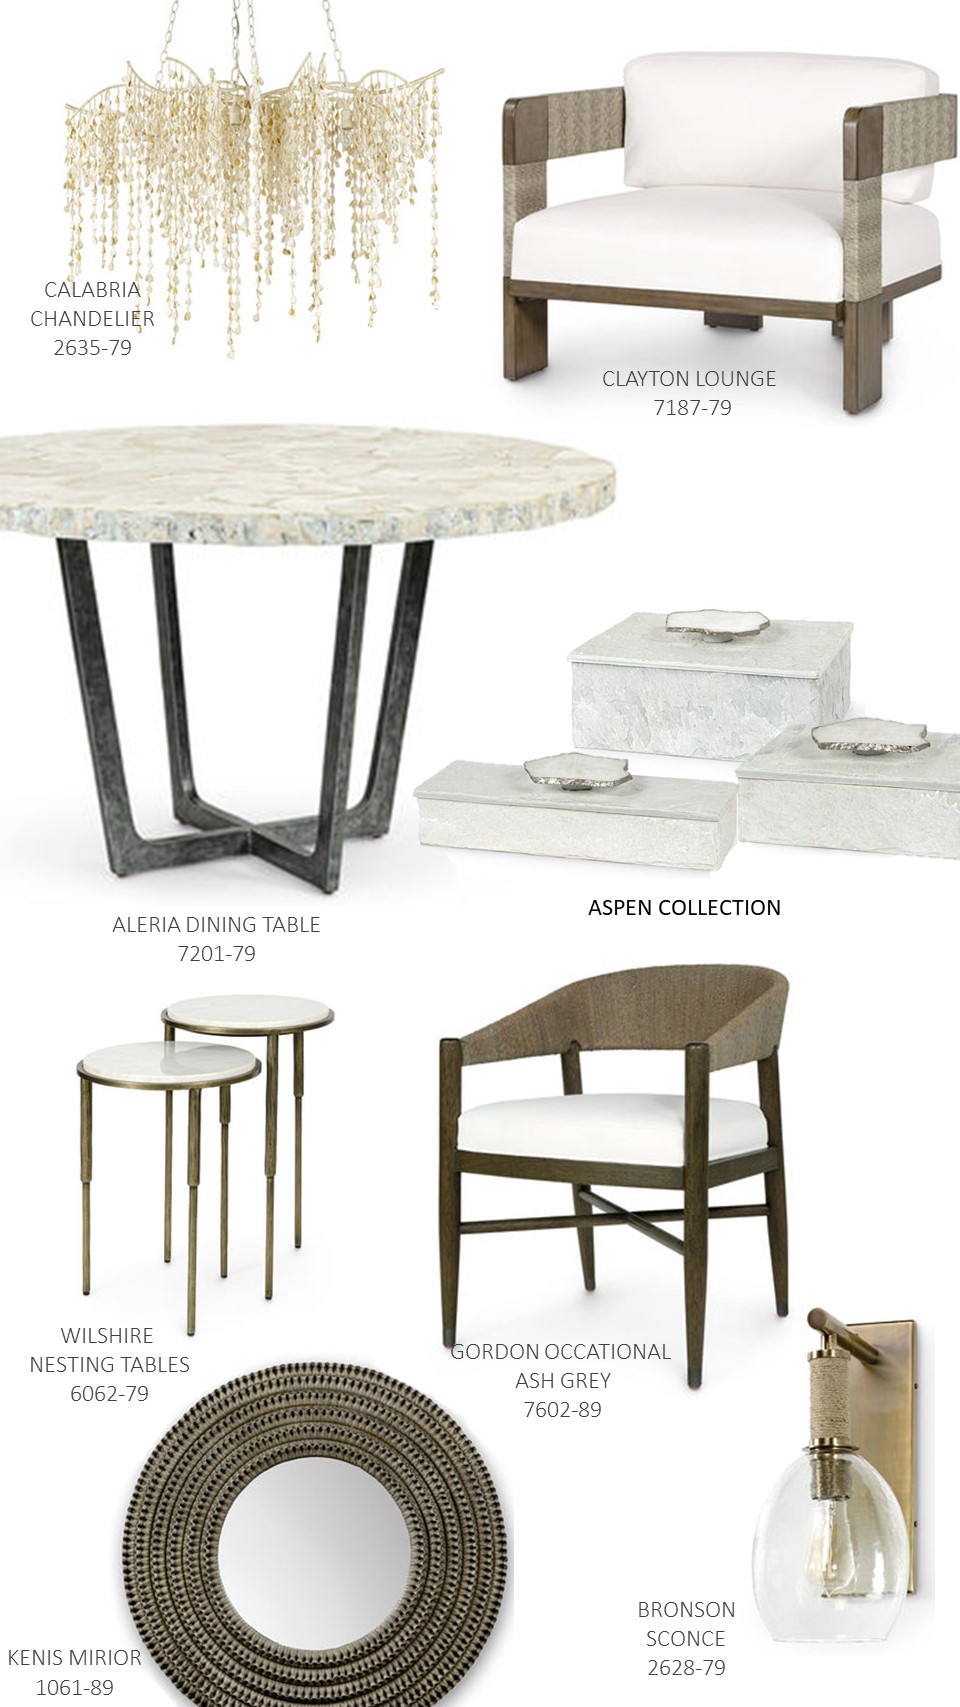 PALECEKS New Fall Introductions 2020 - News from Laguna Design Center